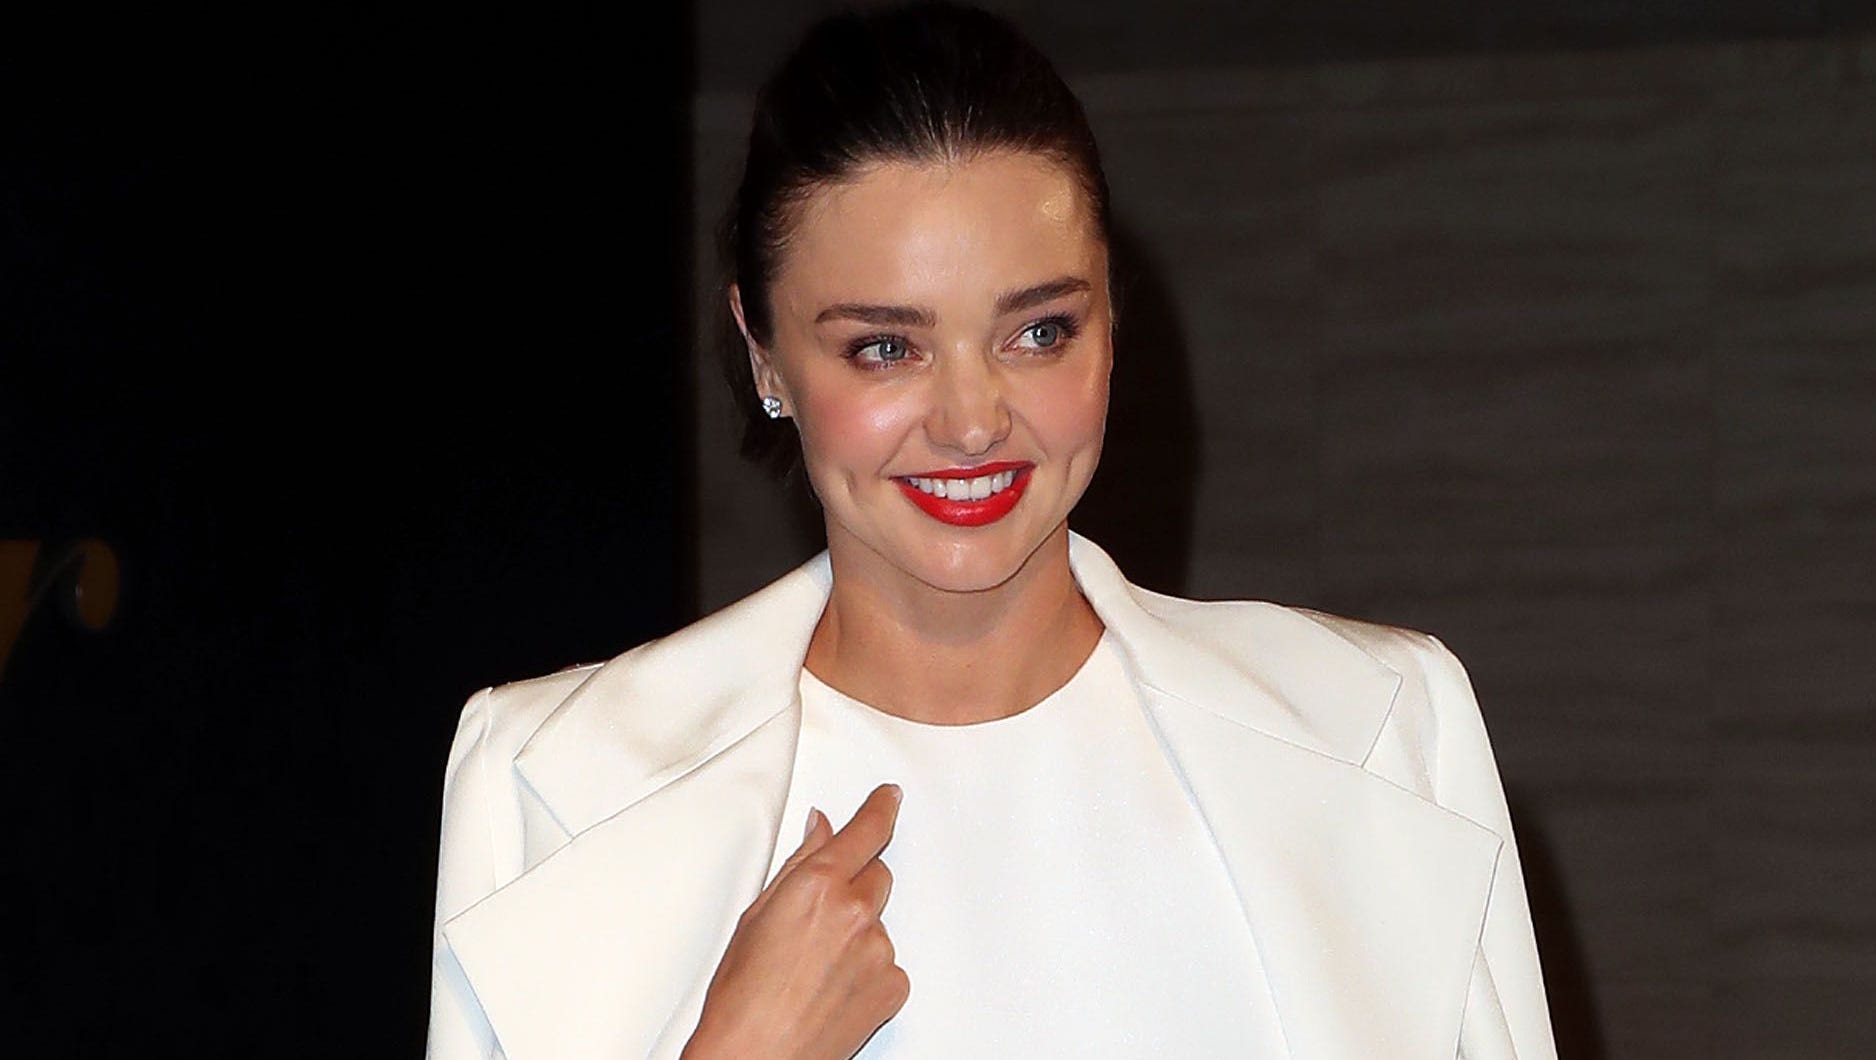 Miranda Kerr Turns Over 81m In Jewels Ex Bought With Malaysian